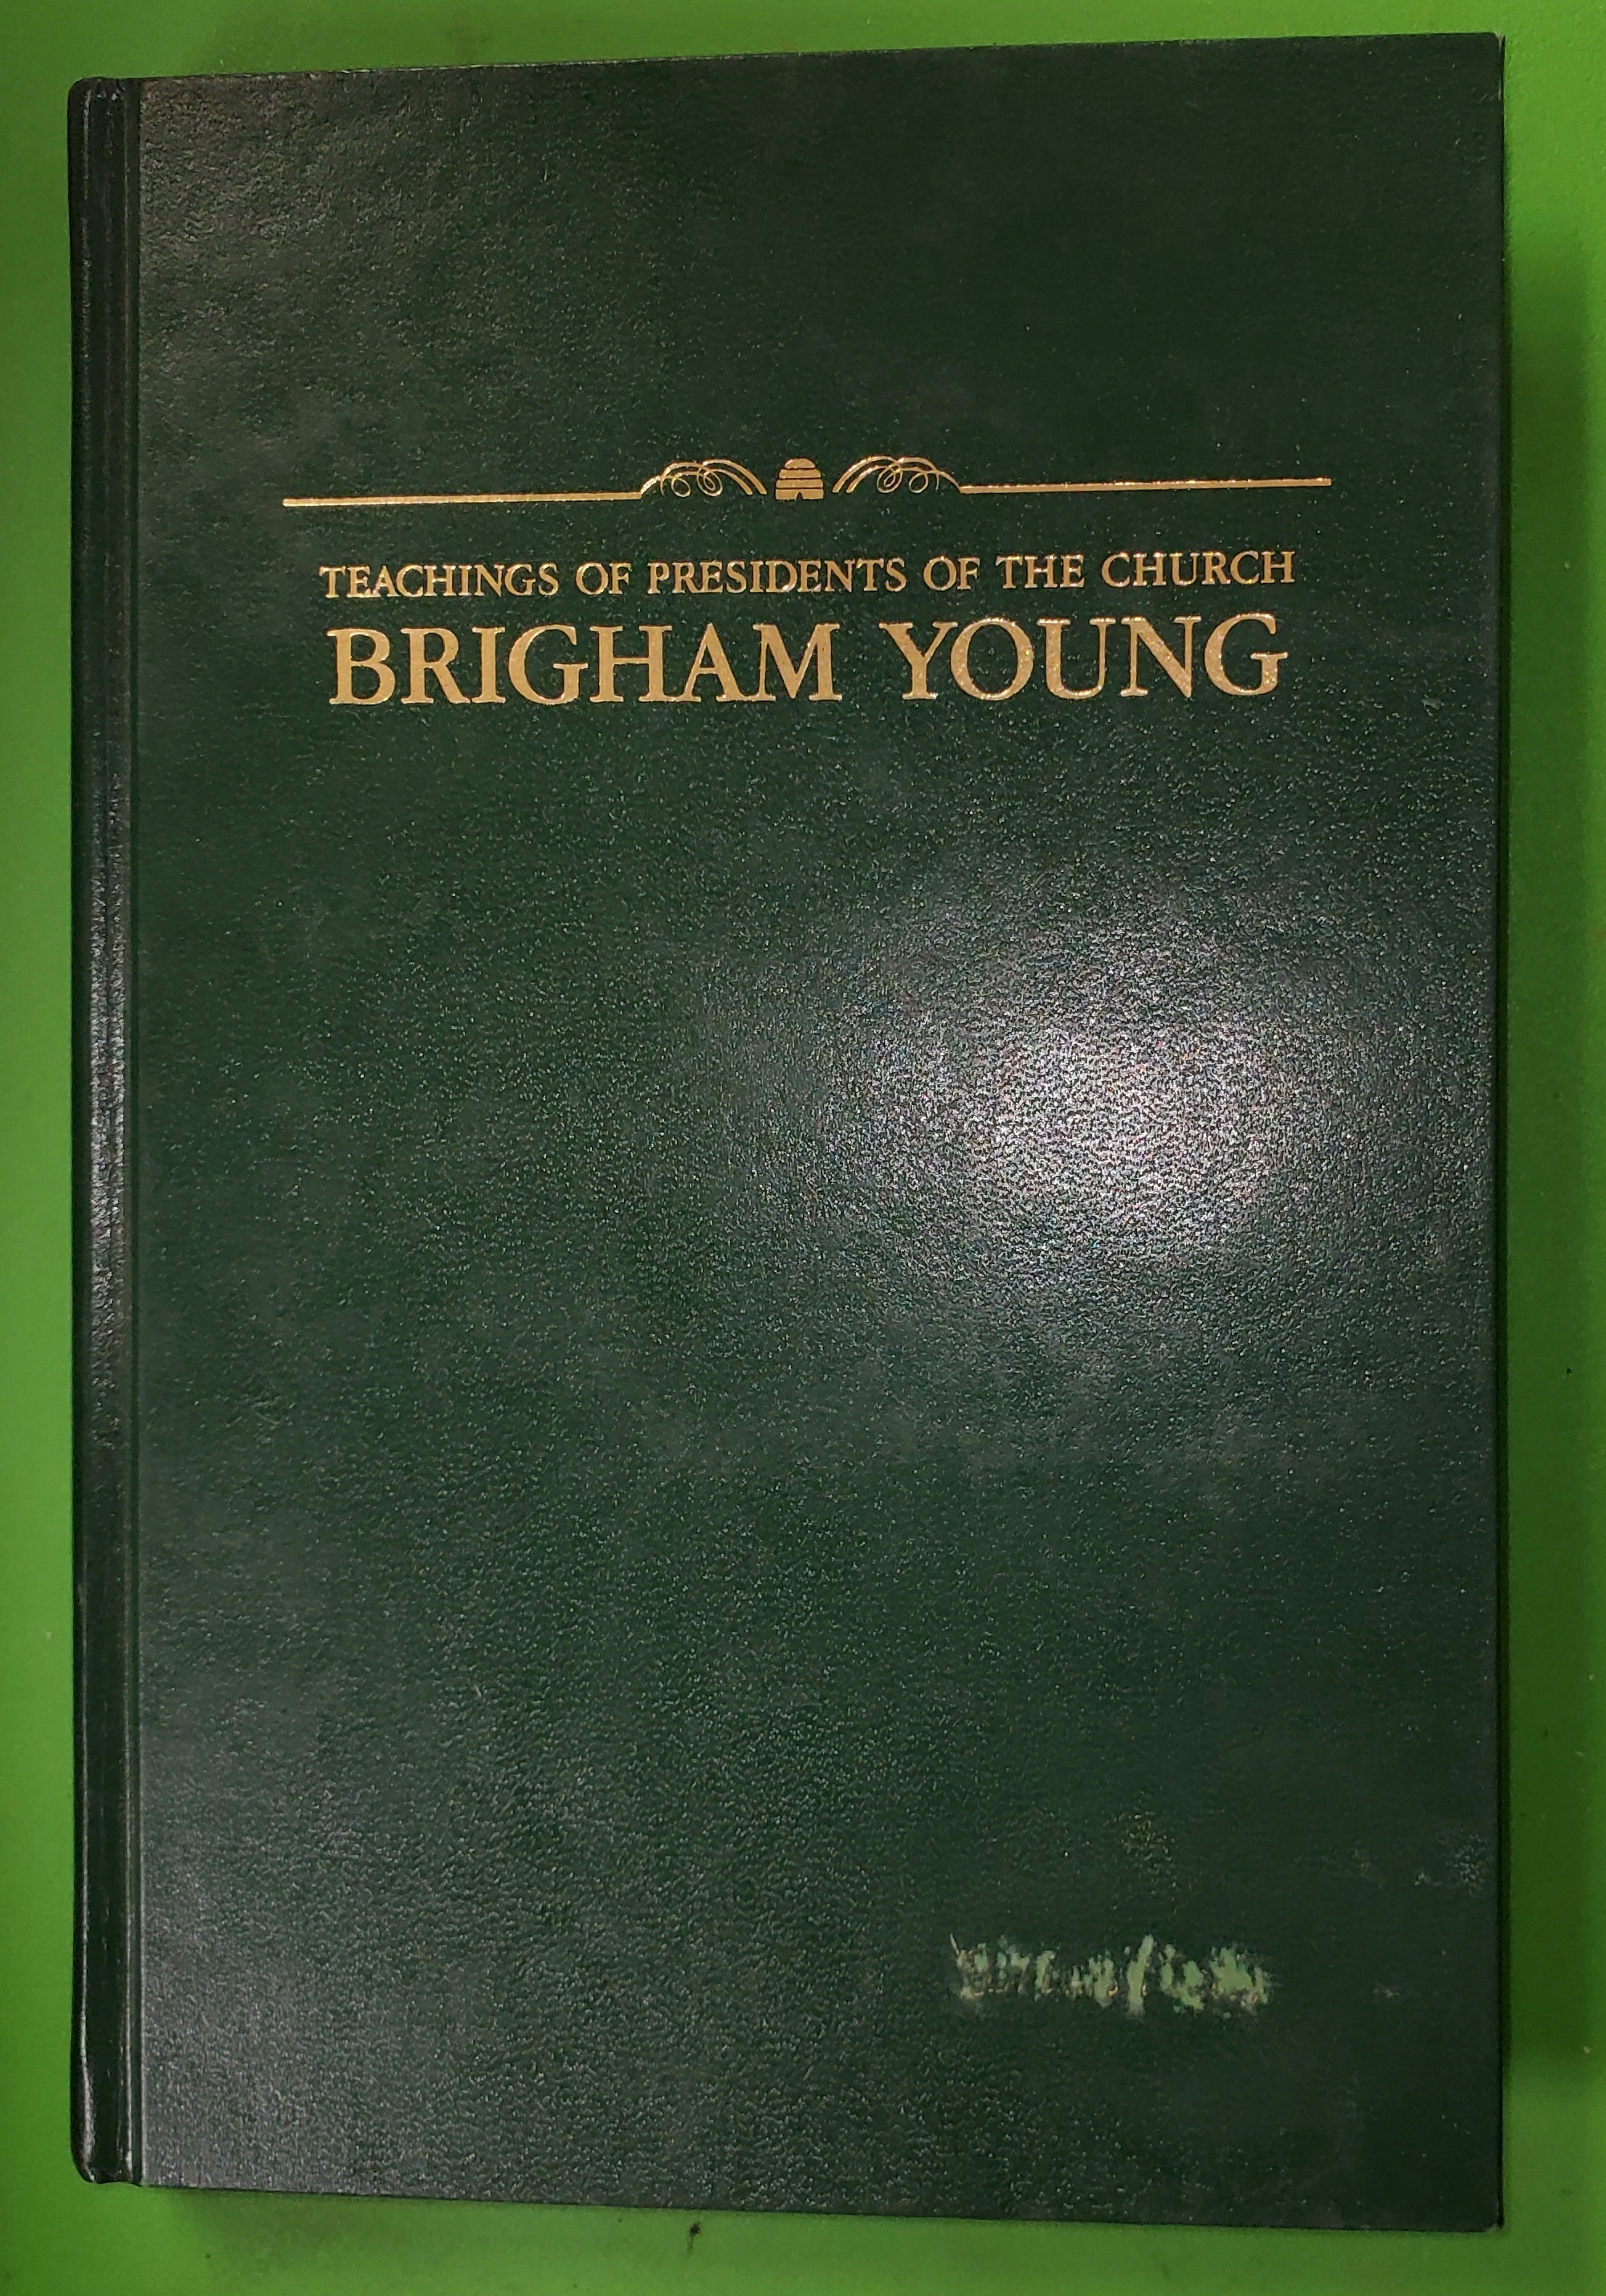 Image for Teachings of Presidents of the Church - Brigham Young [1997 Priesthood and Relief Society Manual]